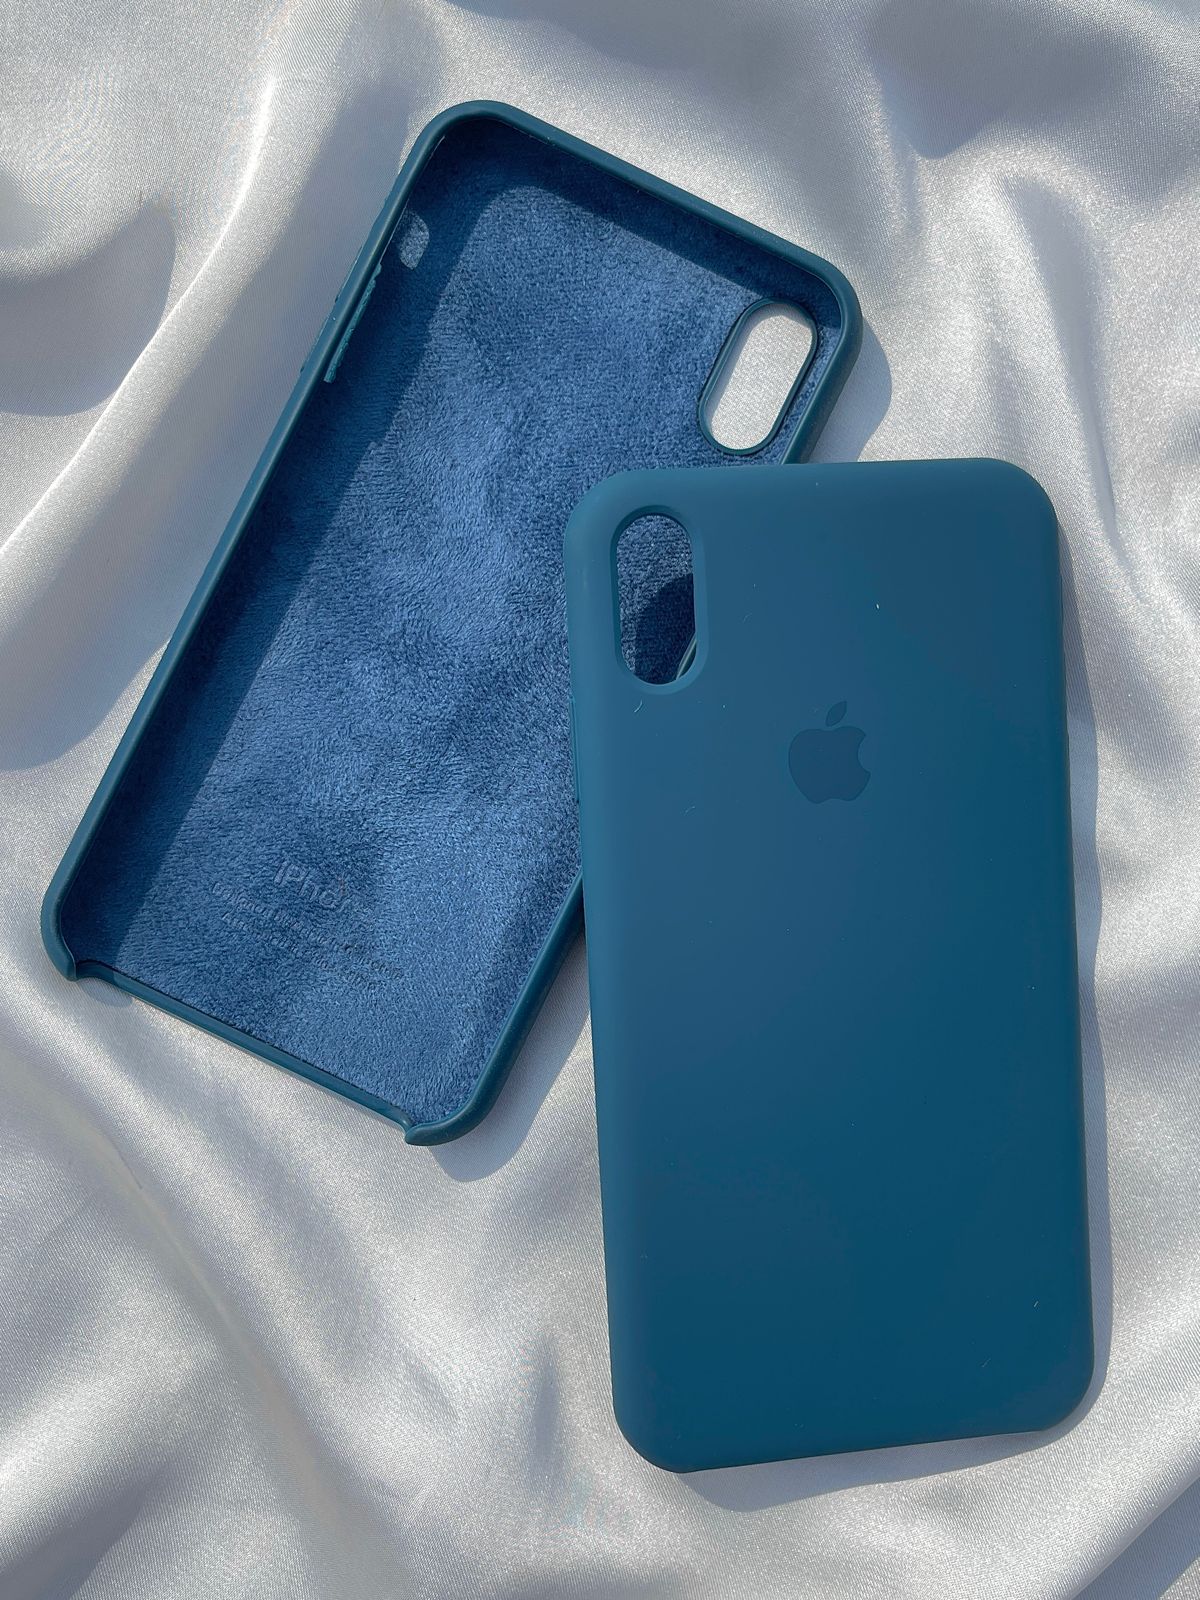 iPhone "XS Max" Silicone Case "Teal Blue"